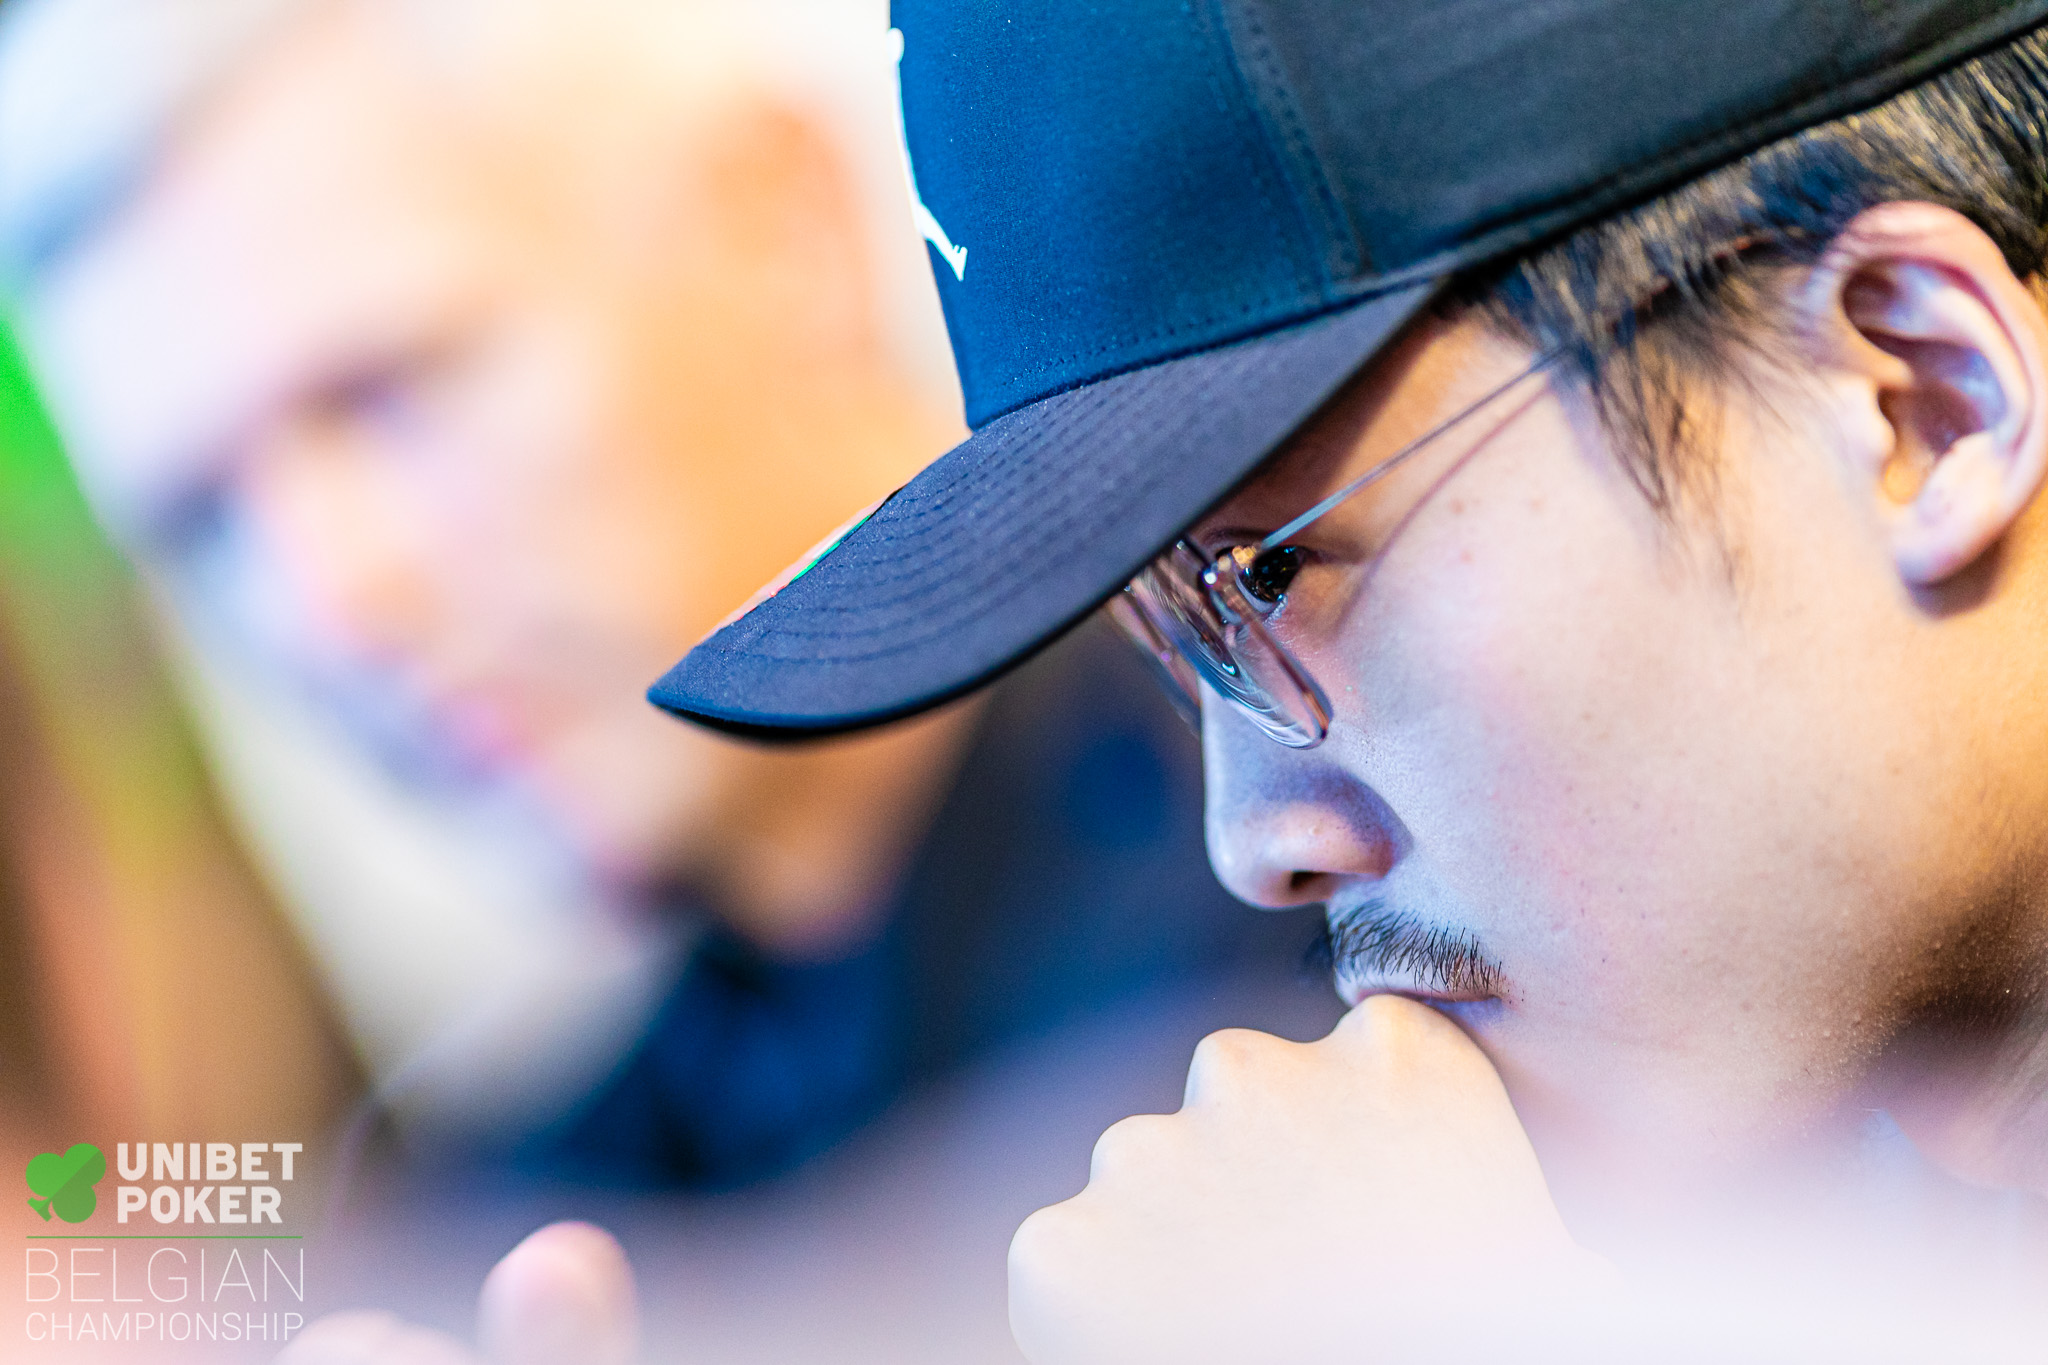 Unibet Poker Belgian Championship 2019 - Main Event (Day 1A) 045 Anthony Lee ((C) Tambet Kask 2019)